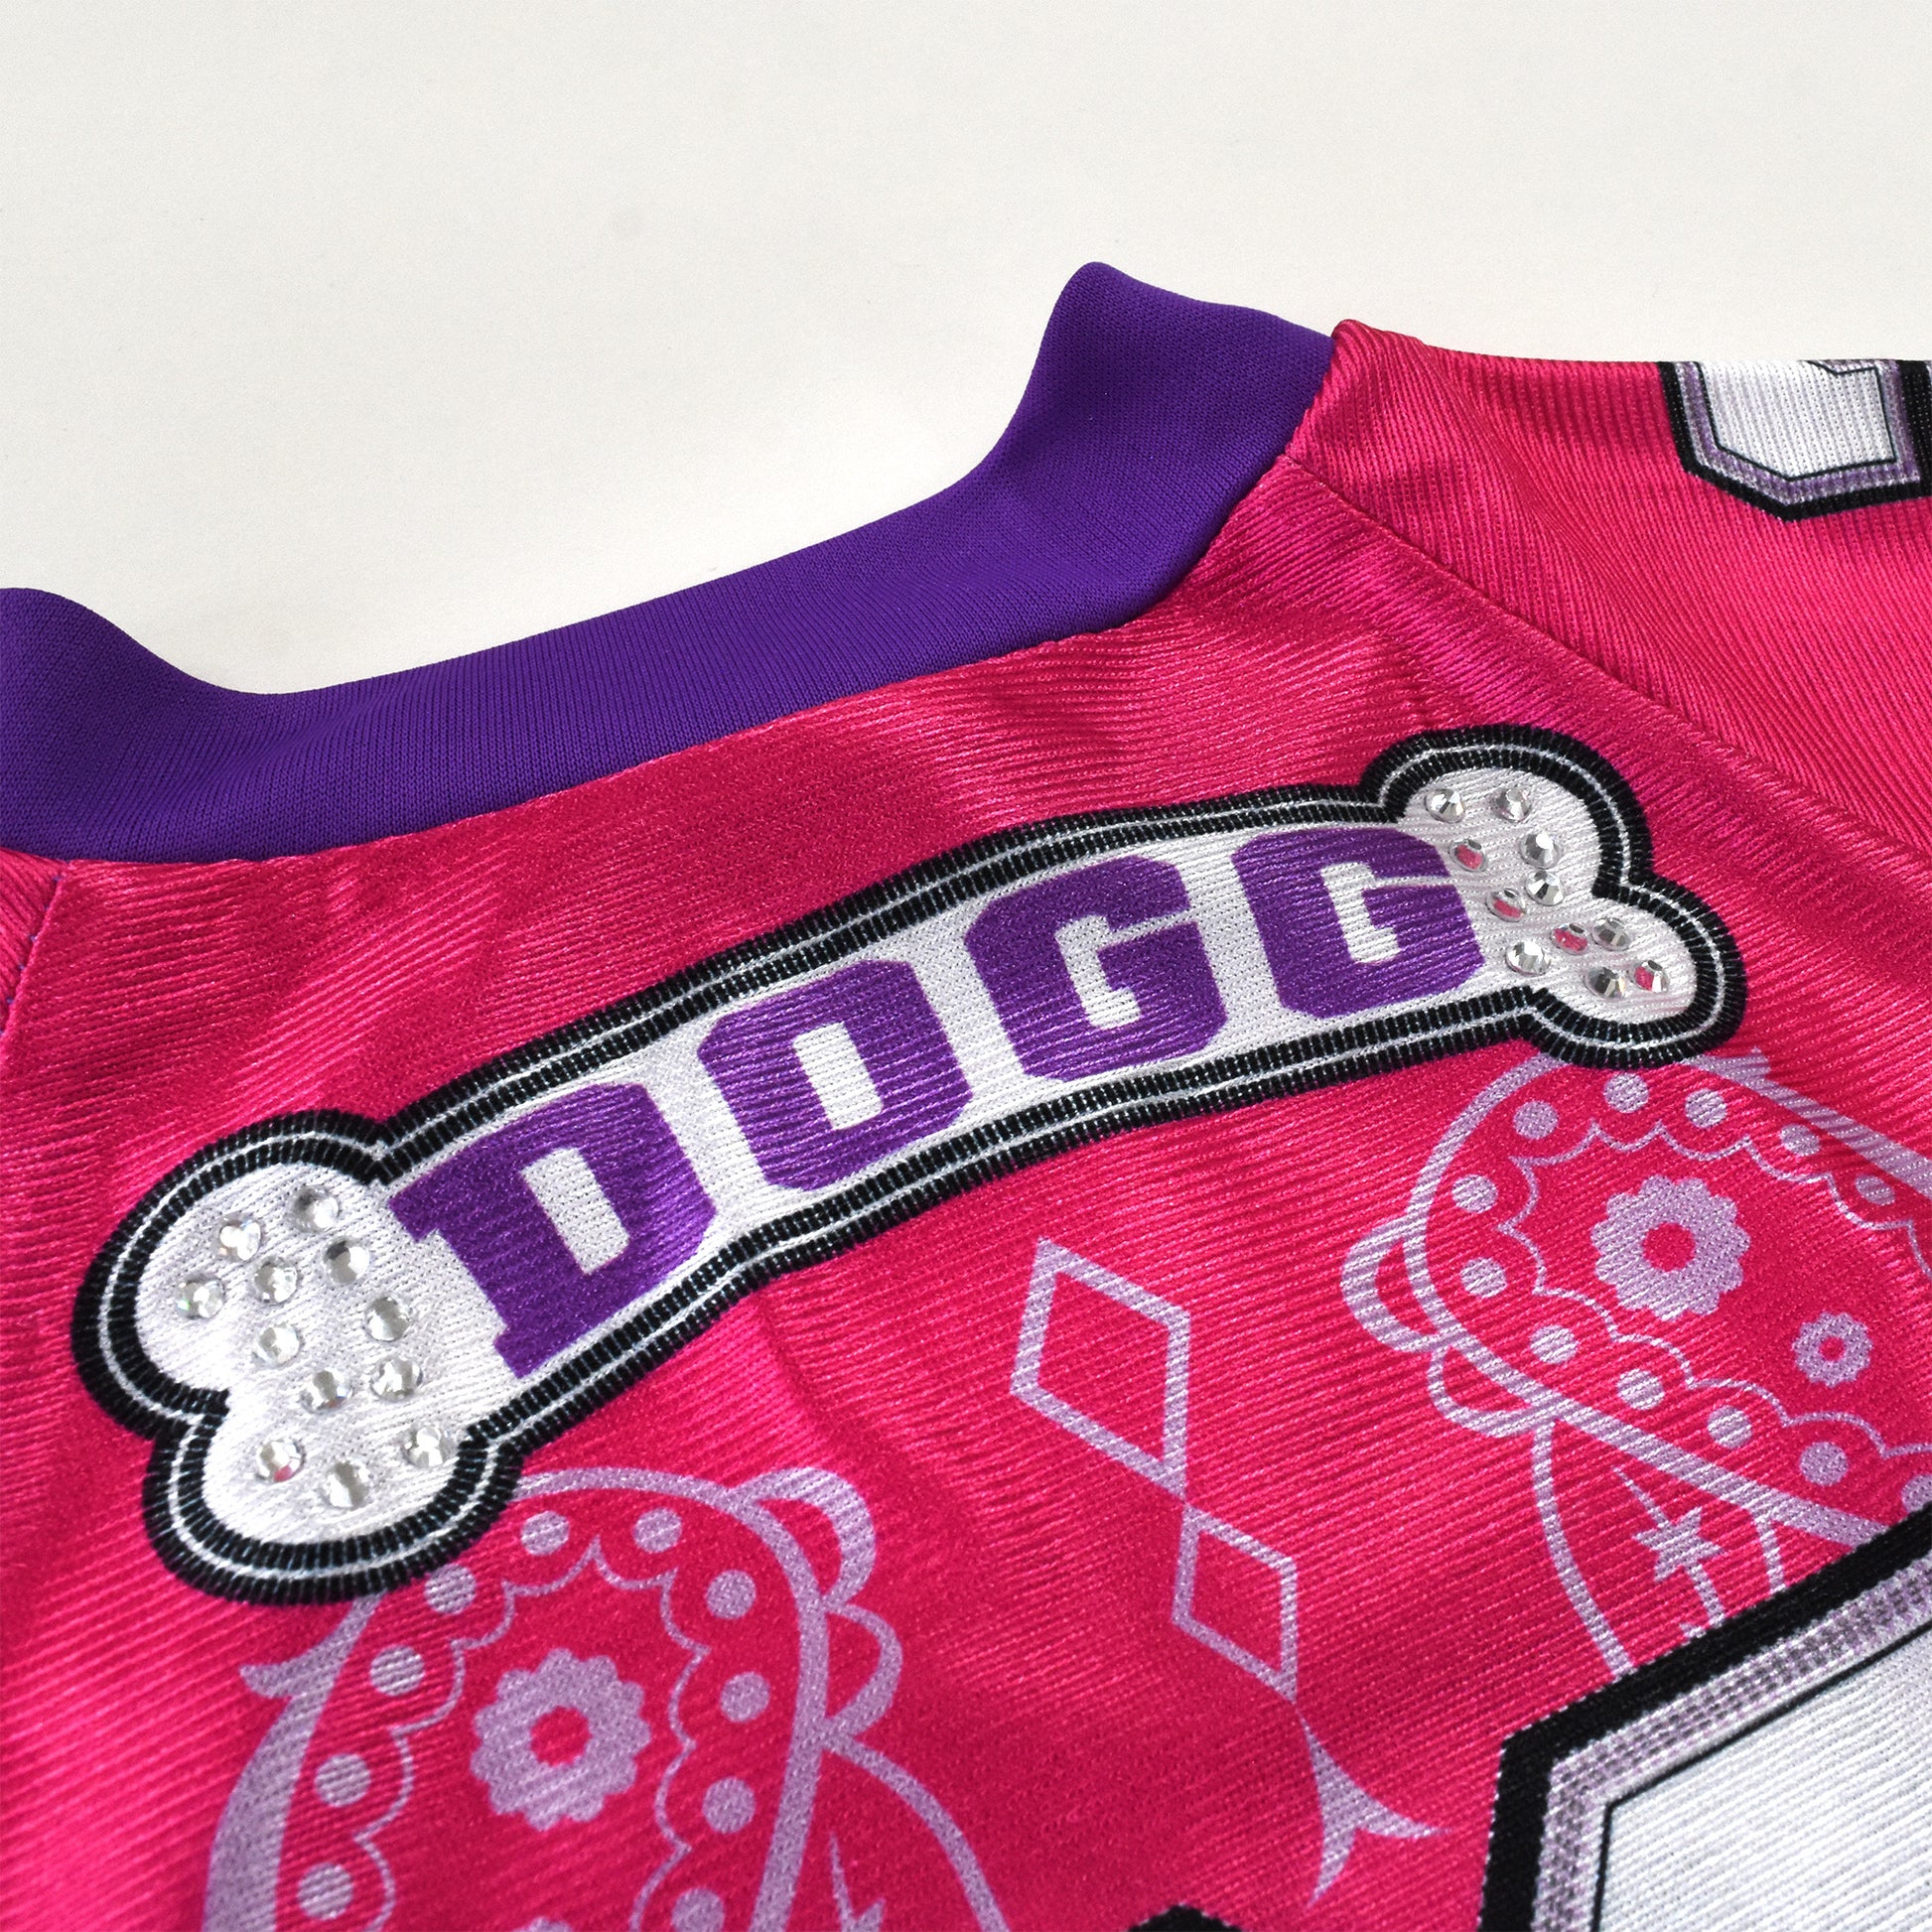 A close up detail image showing design sublimation and sparkle detail of the Boss Lady Deluxe Pet Jersey.